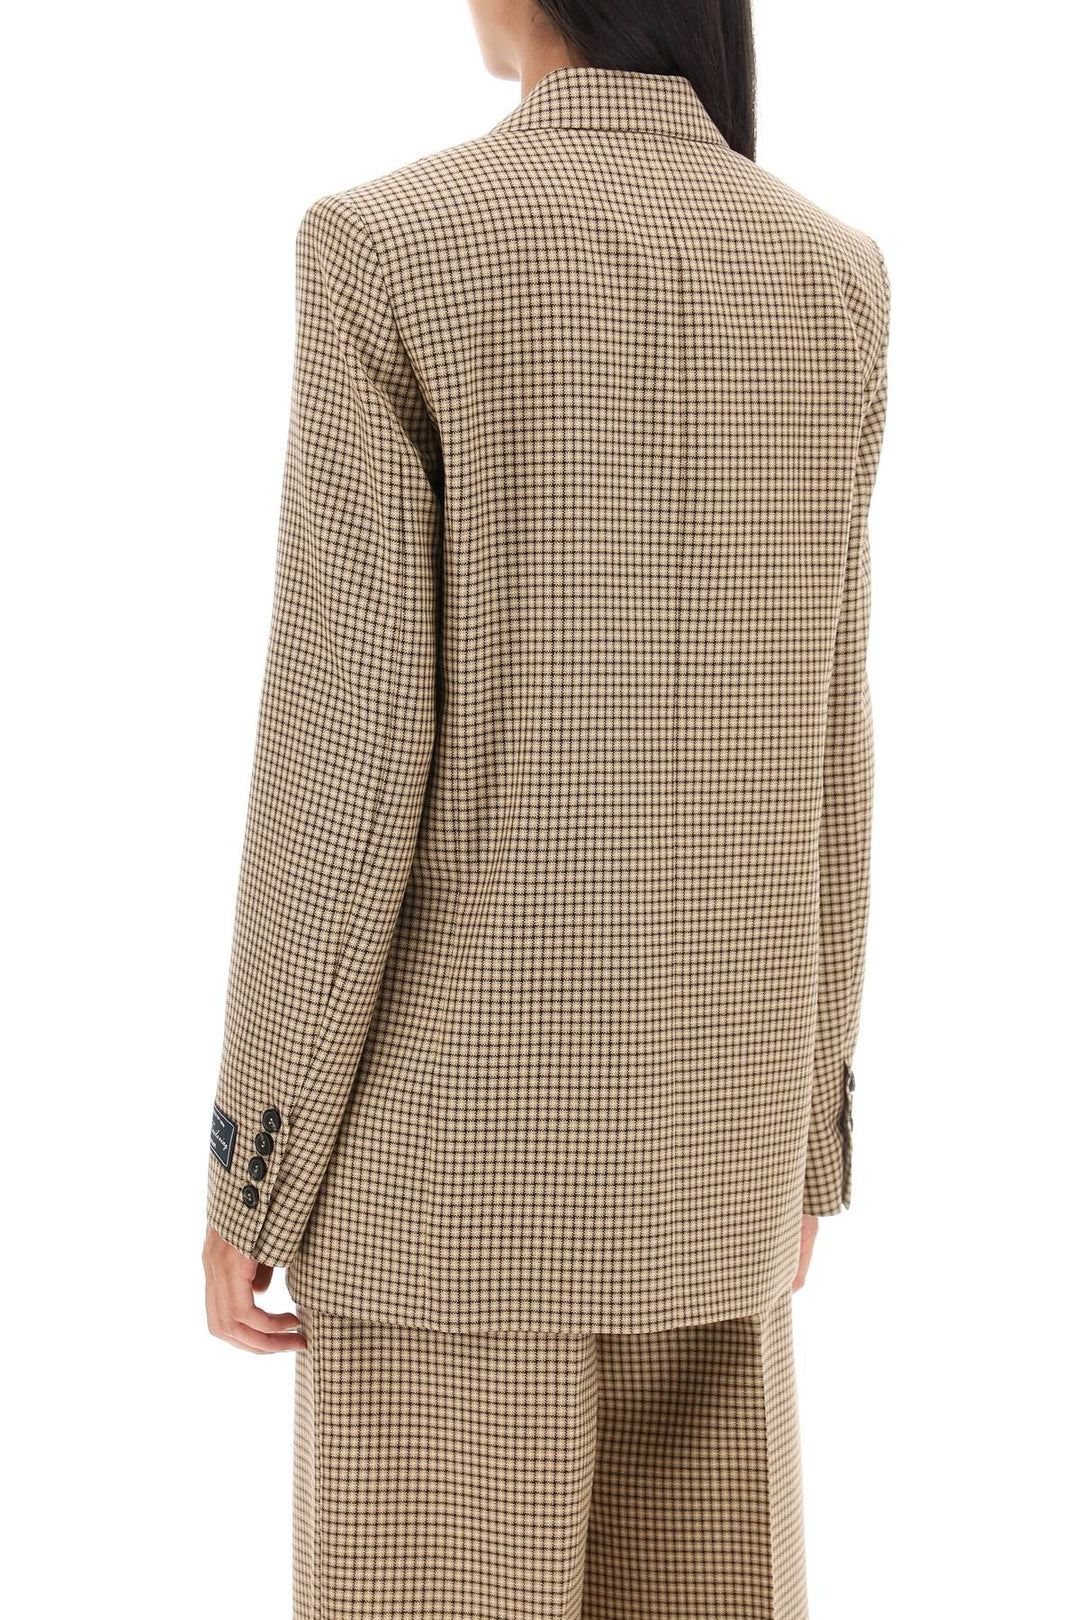 Msgm Check Motif Double Breasted Blazer   Beige